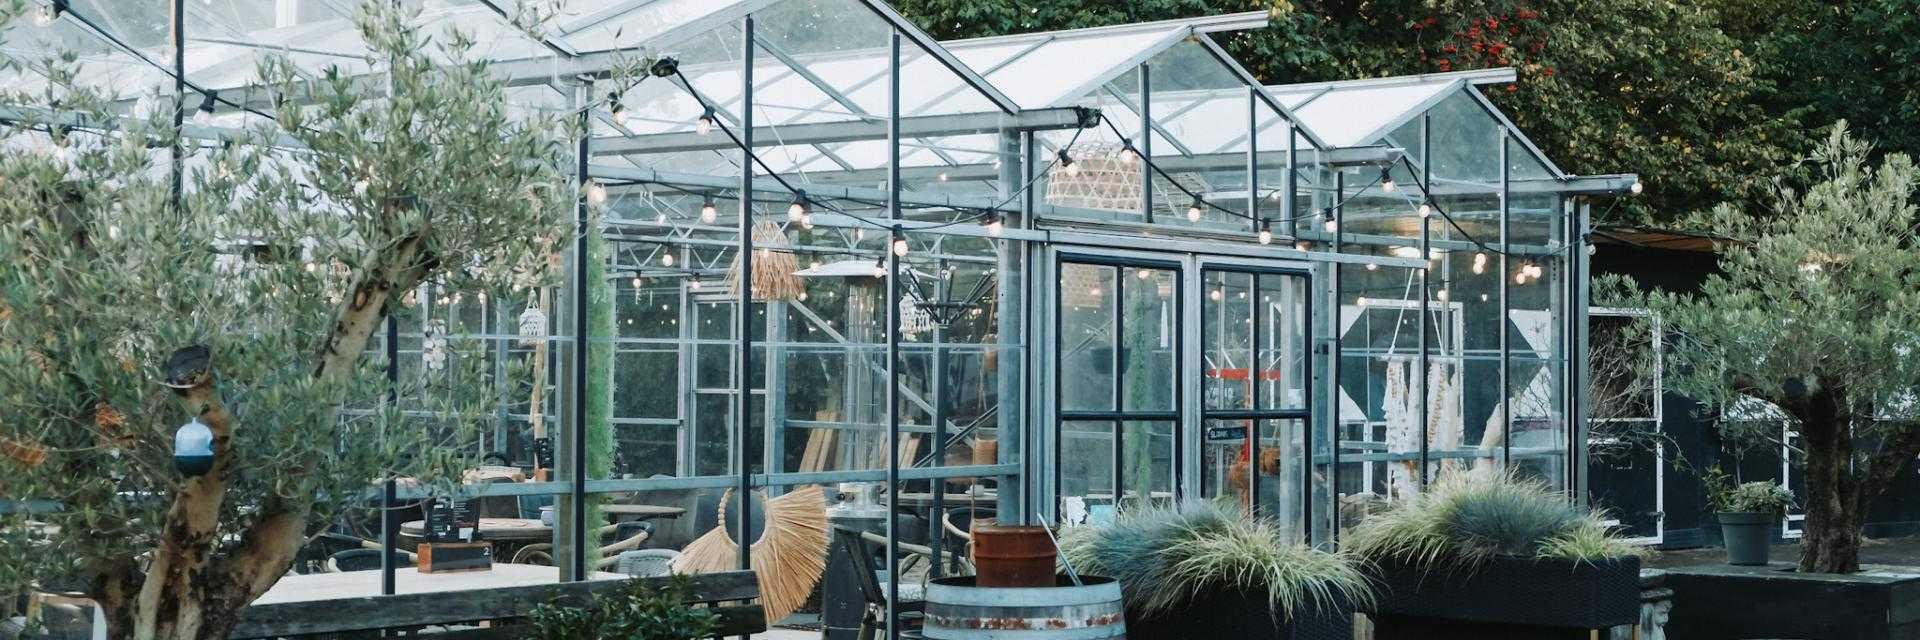 Ready2Q: cozy restaurant in a greenhouse